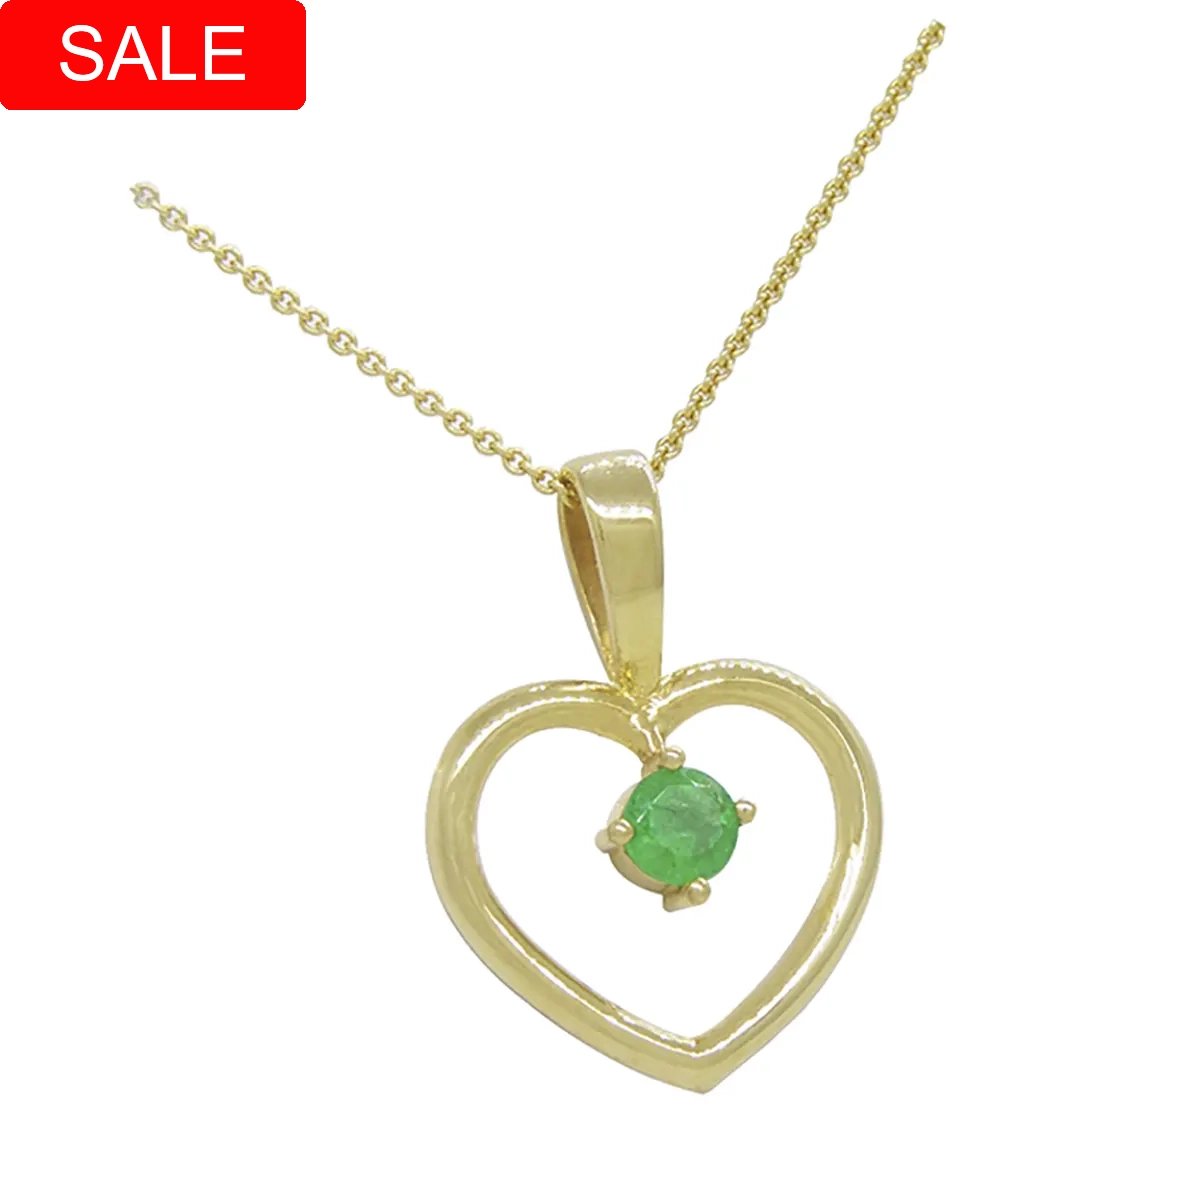 Gold Plated Silver Heart Shape Pendant with Genuine Round Cut Emerald